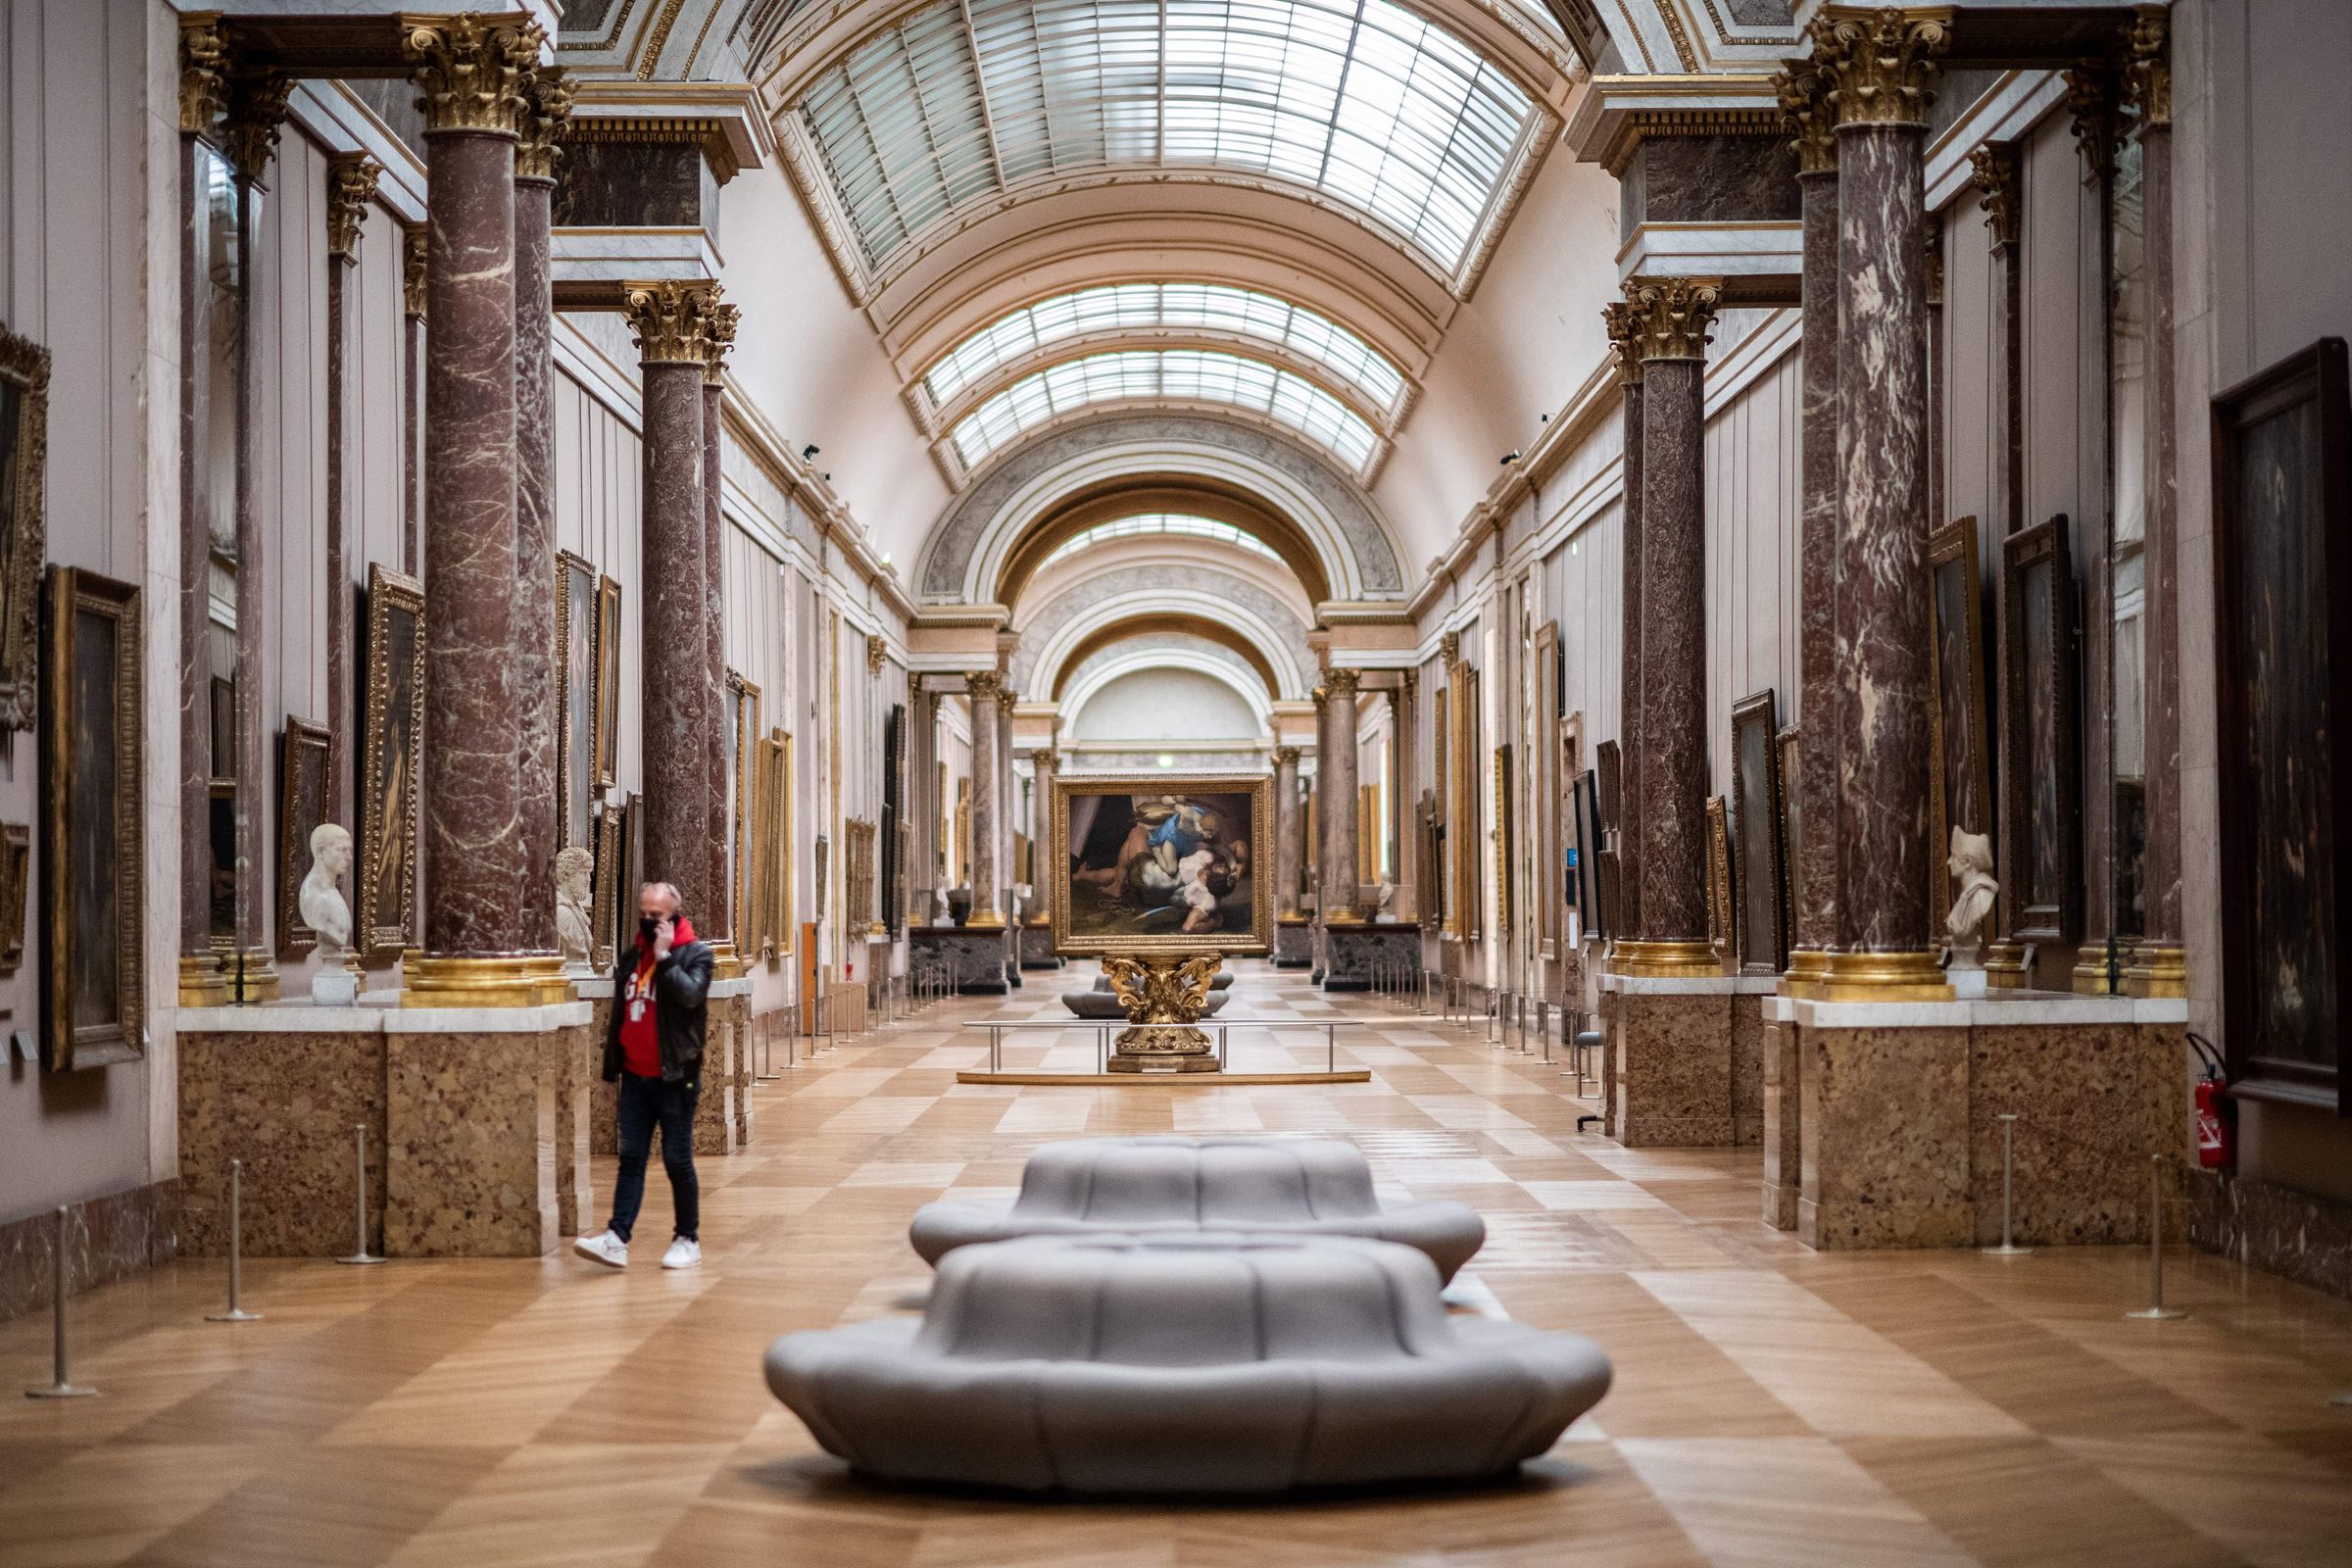 A spacious, sunlit gallery hall at the Louvre, with skylights, marble pillars, and artworks along the walls. 